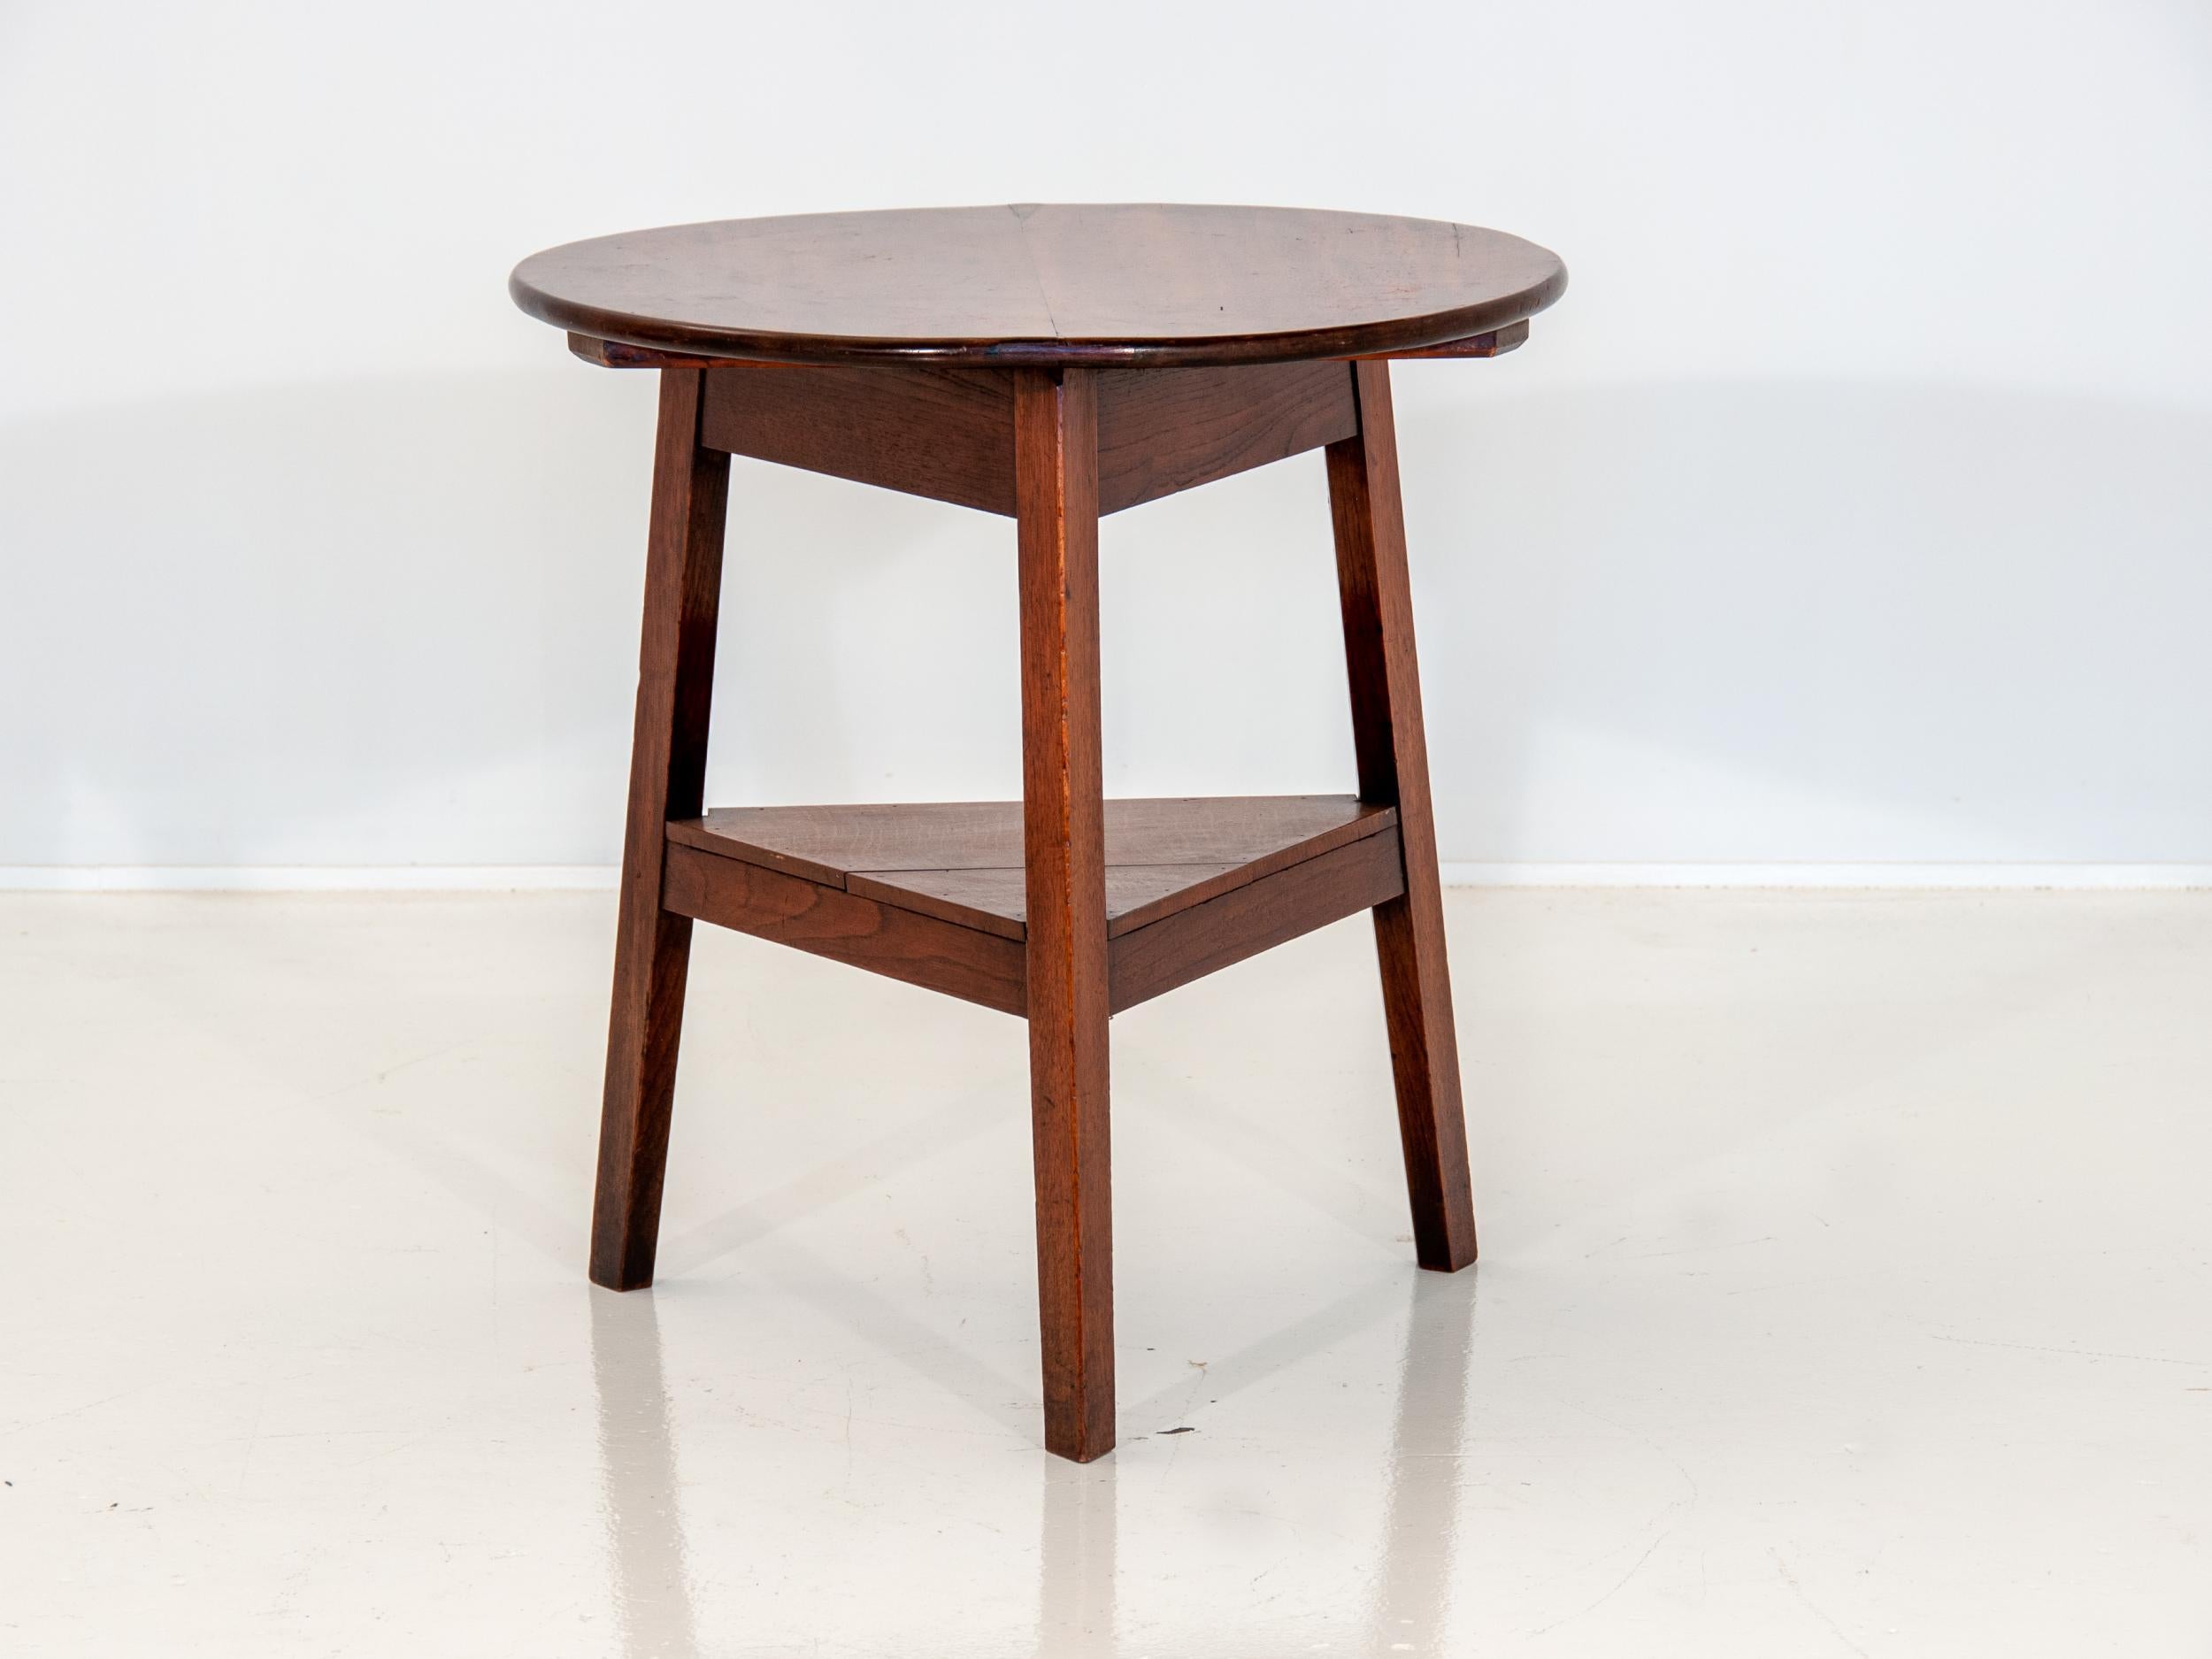 19th century antique cricket table. Originally used as a pub table, this table has a mahogany top and an ash base. A beautiful table with a variety of uses. Measure: Shelf height is 9.5